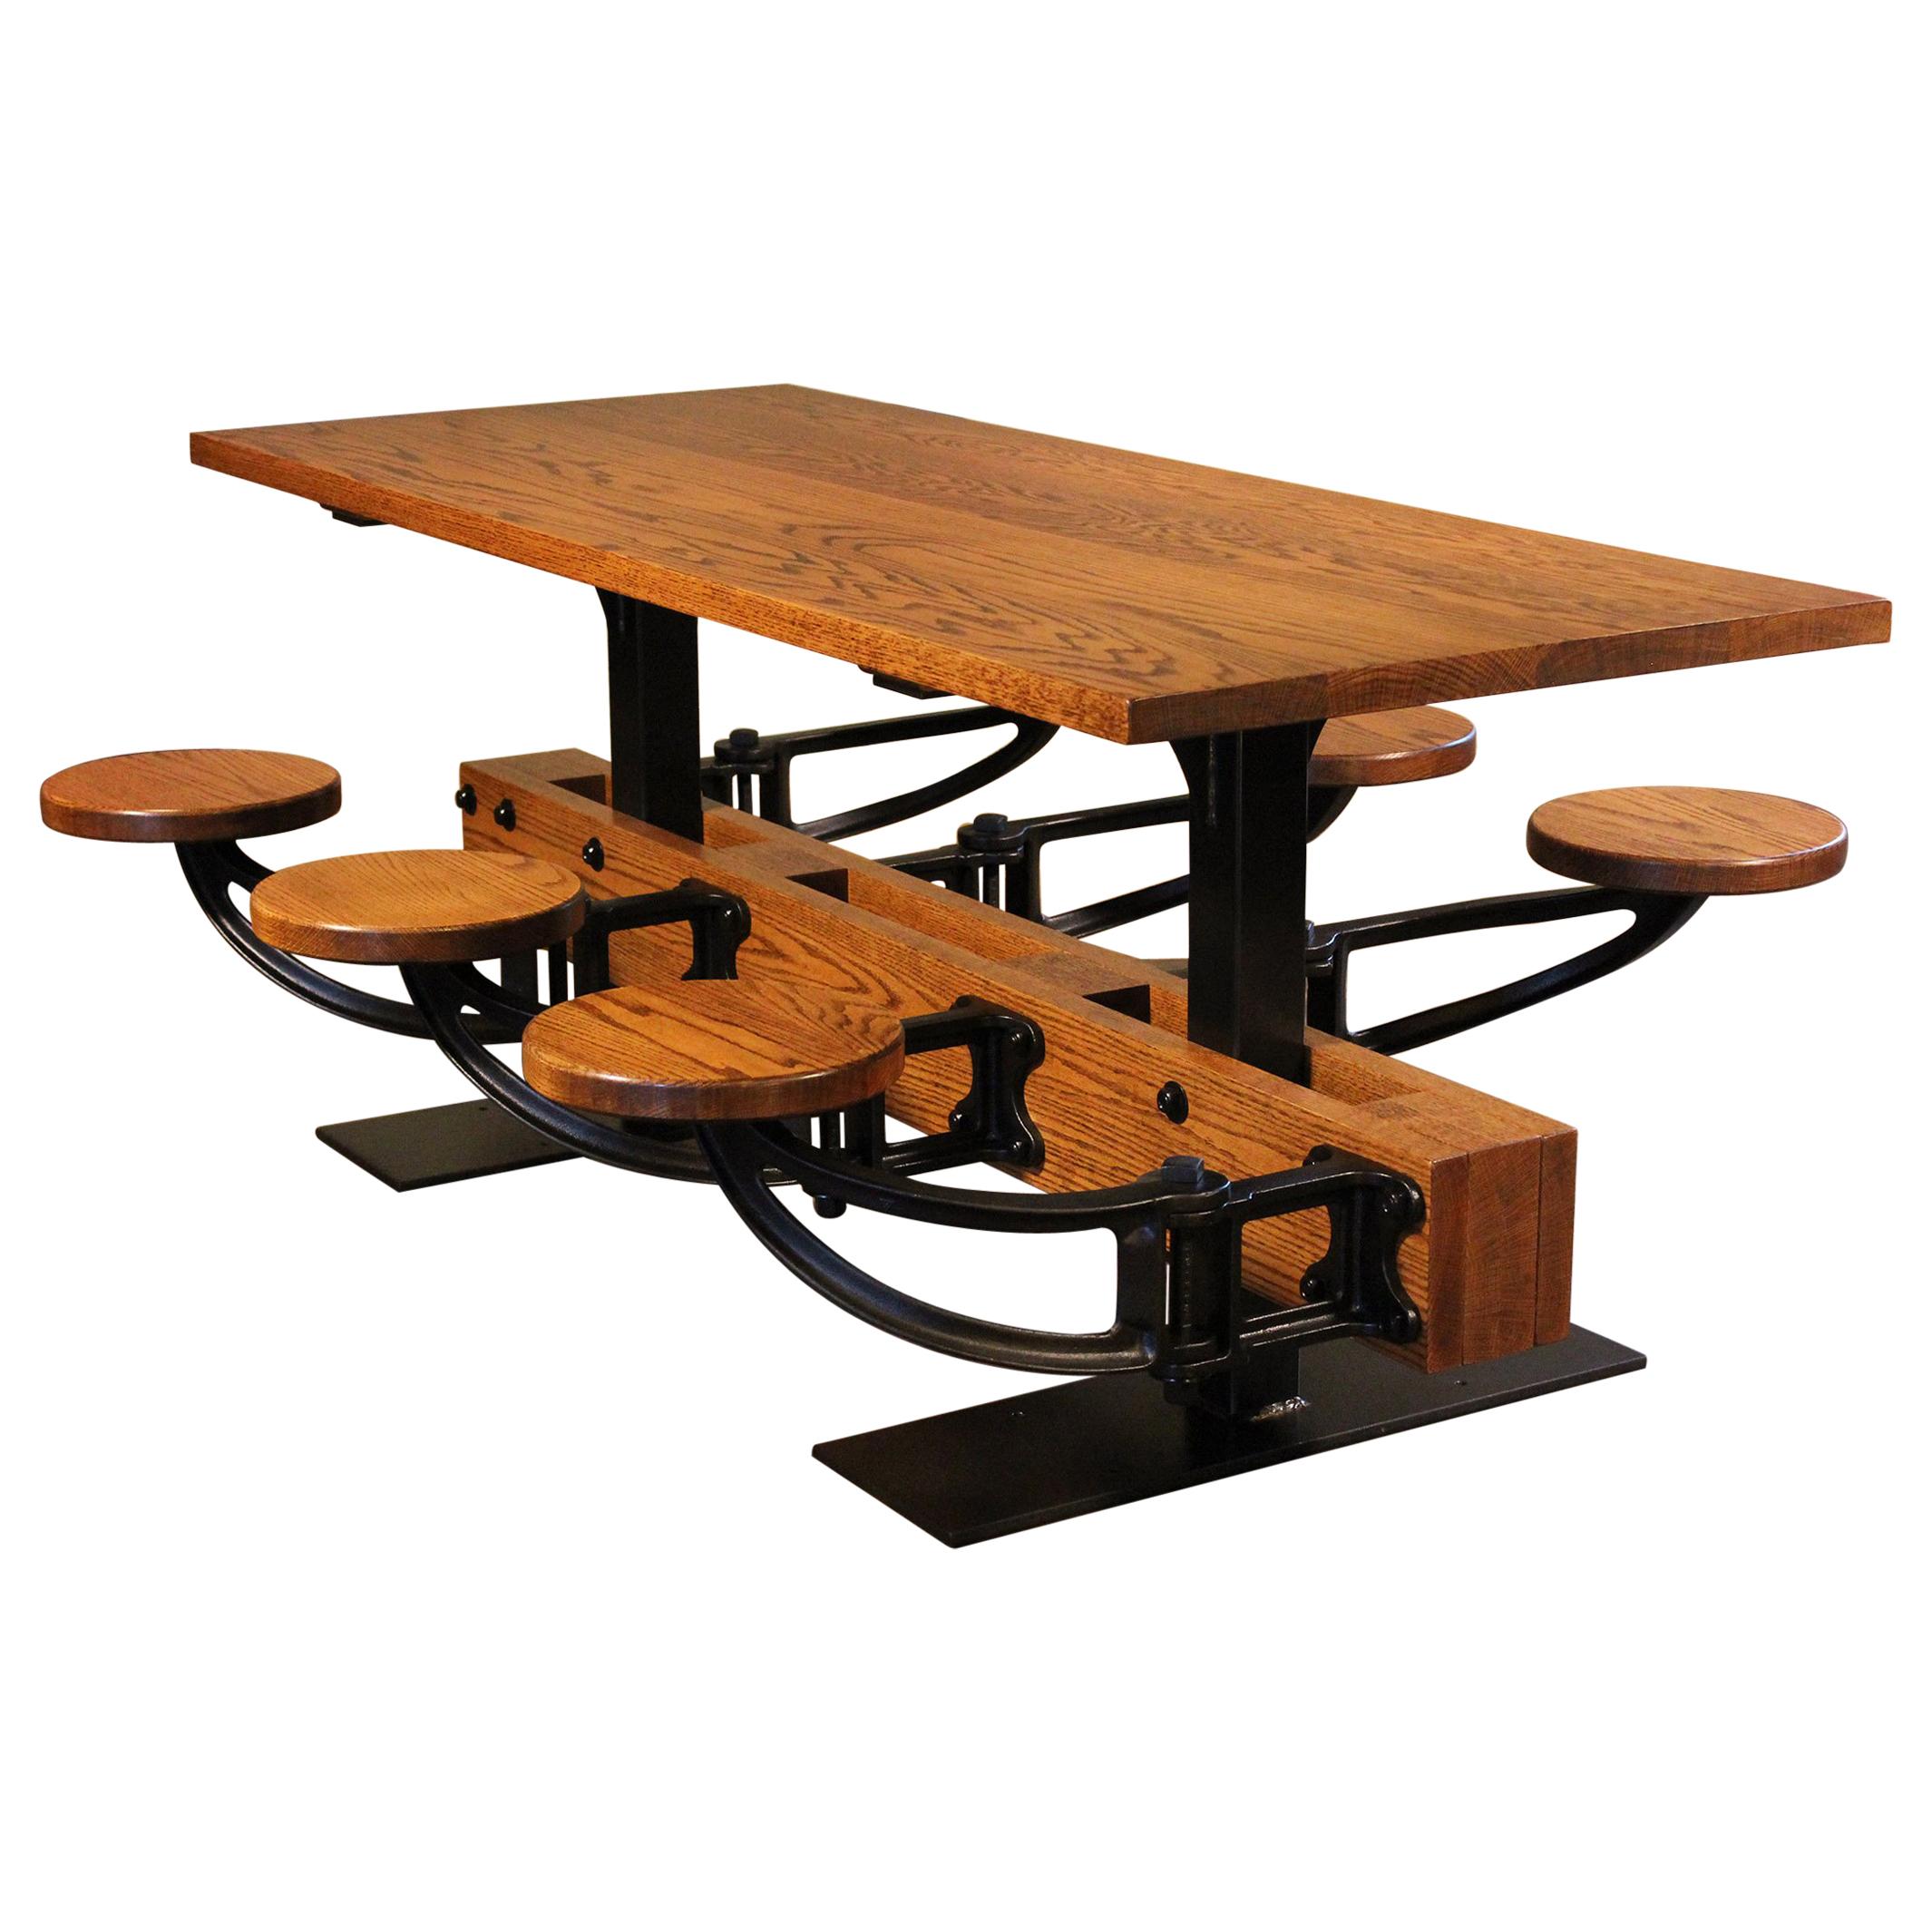 Oak Kitchen Breakfast Table with Attached Swing-Out Seats